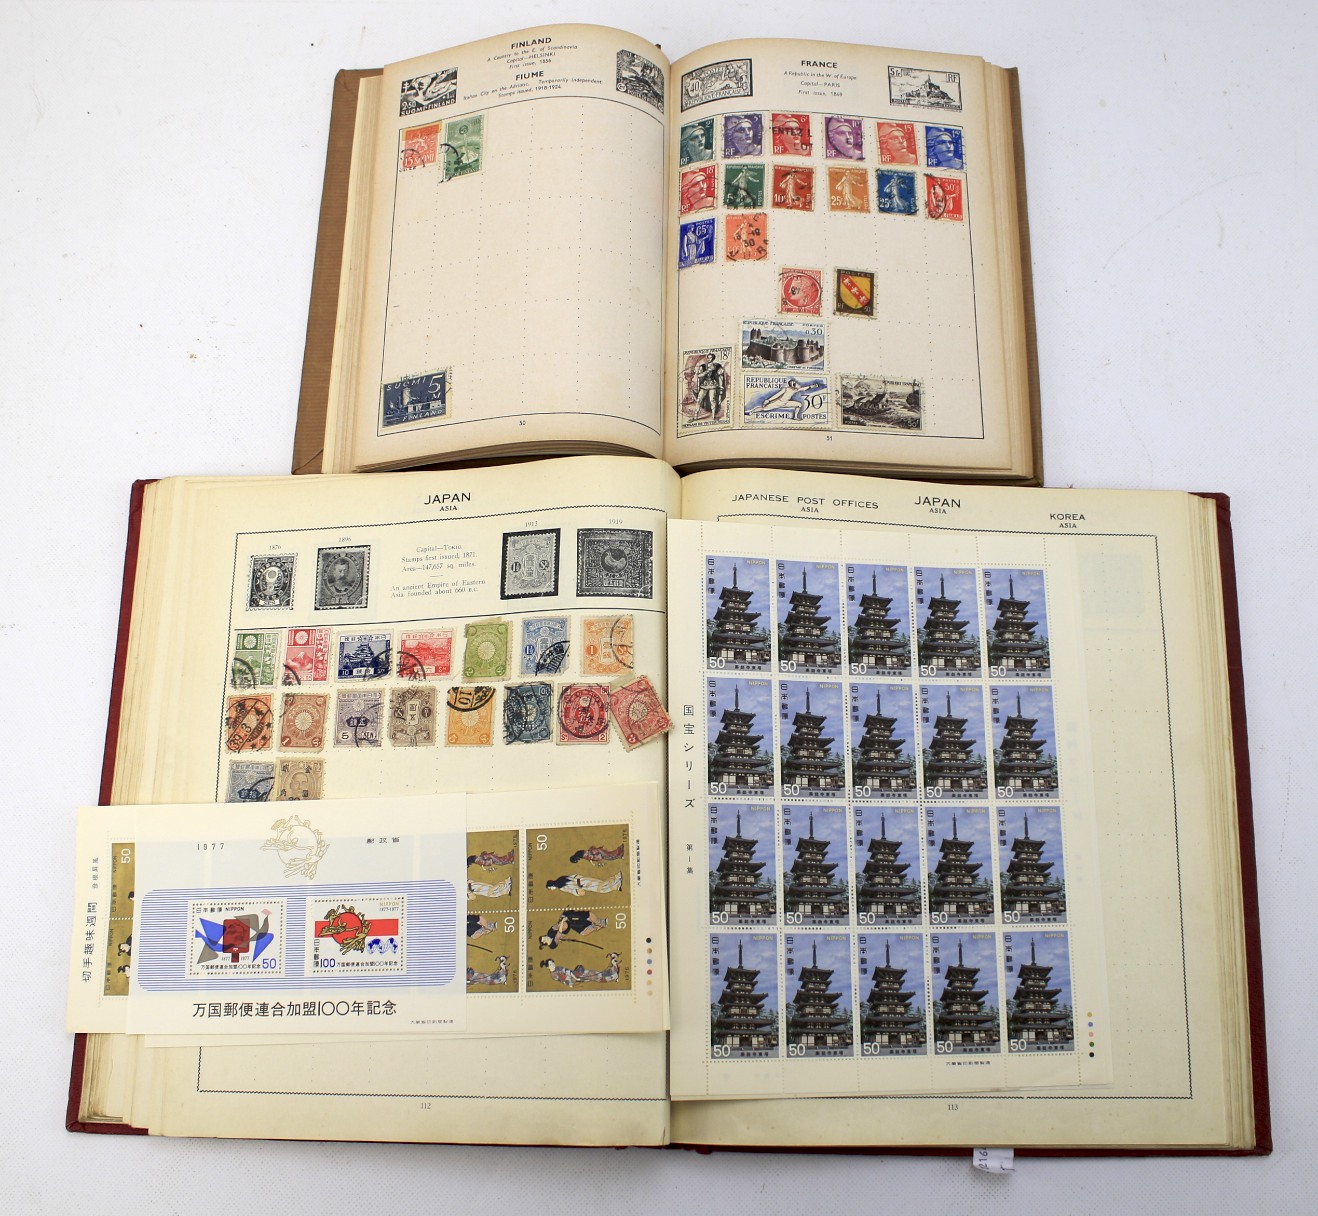 Two 20th century stamp albums. Containing an assortment of European and rest of the world stamps.